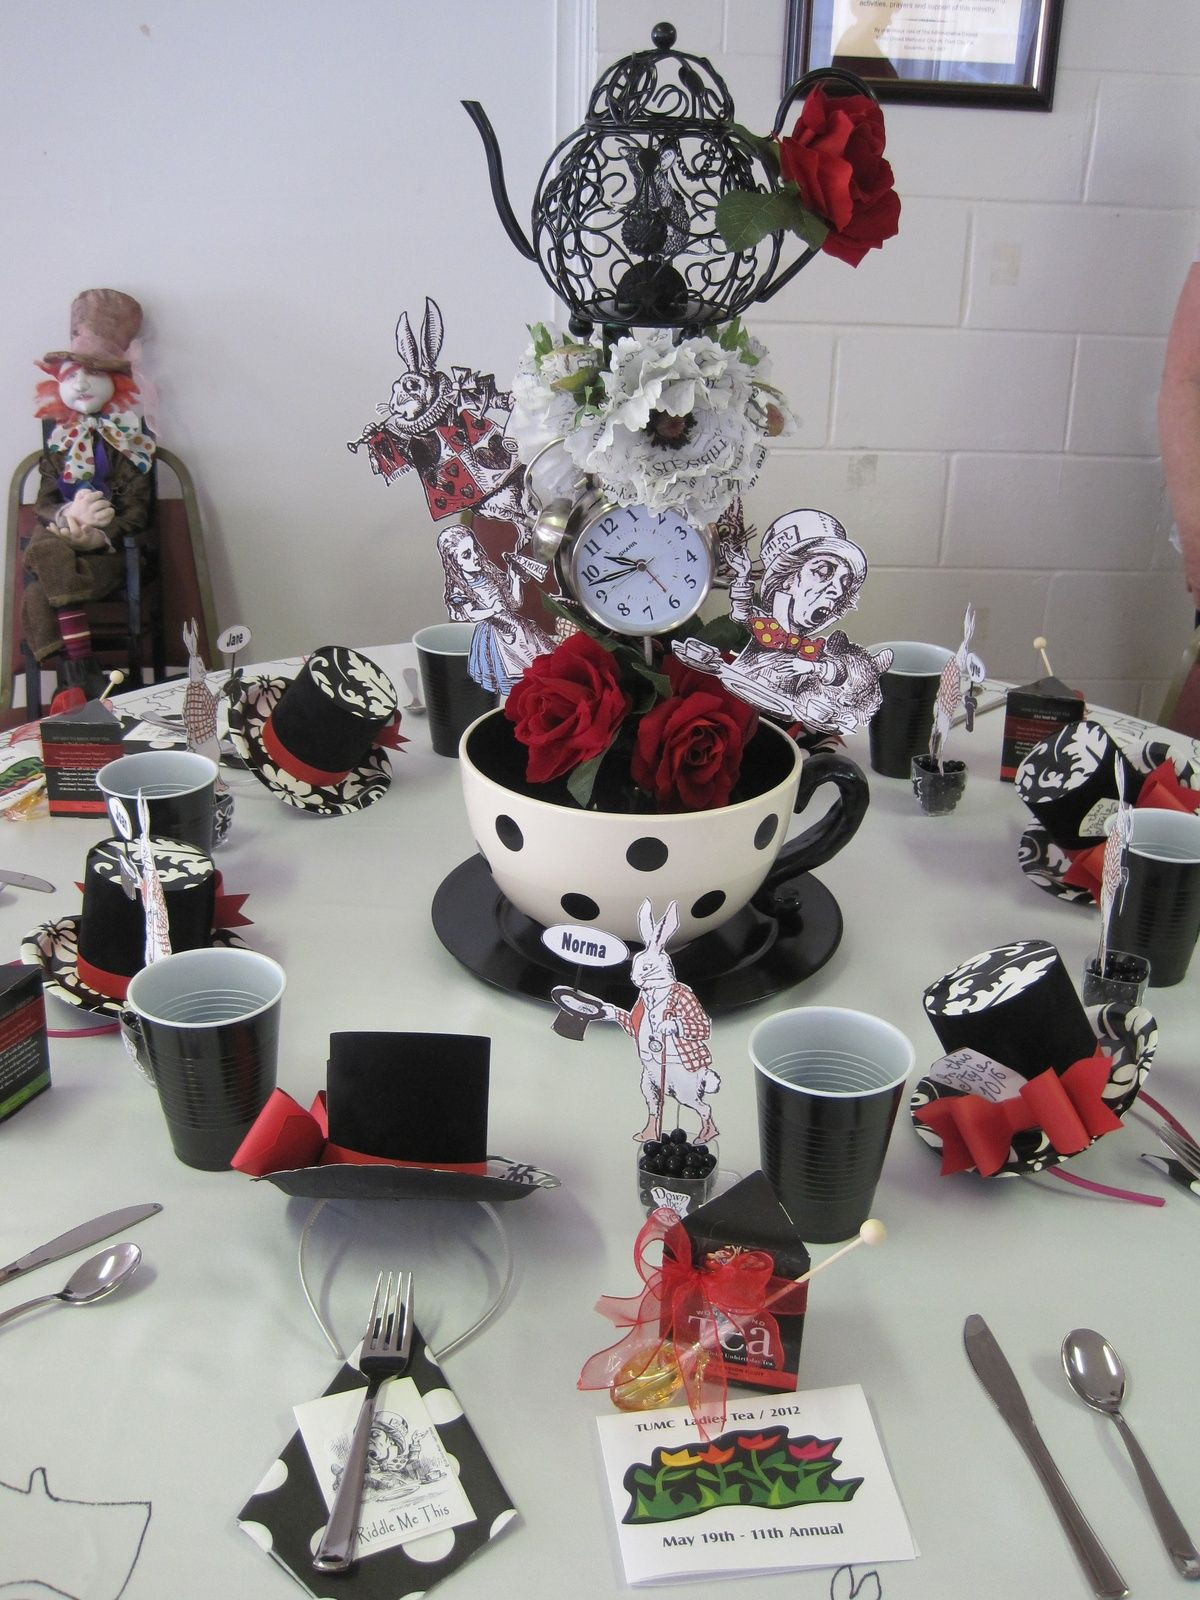 Mad Hatter Tea Party Decoration Ideas
 Mad Hatter Tea Party decorations